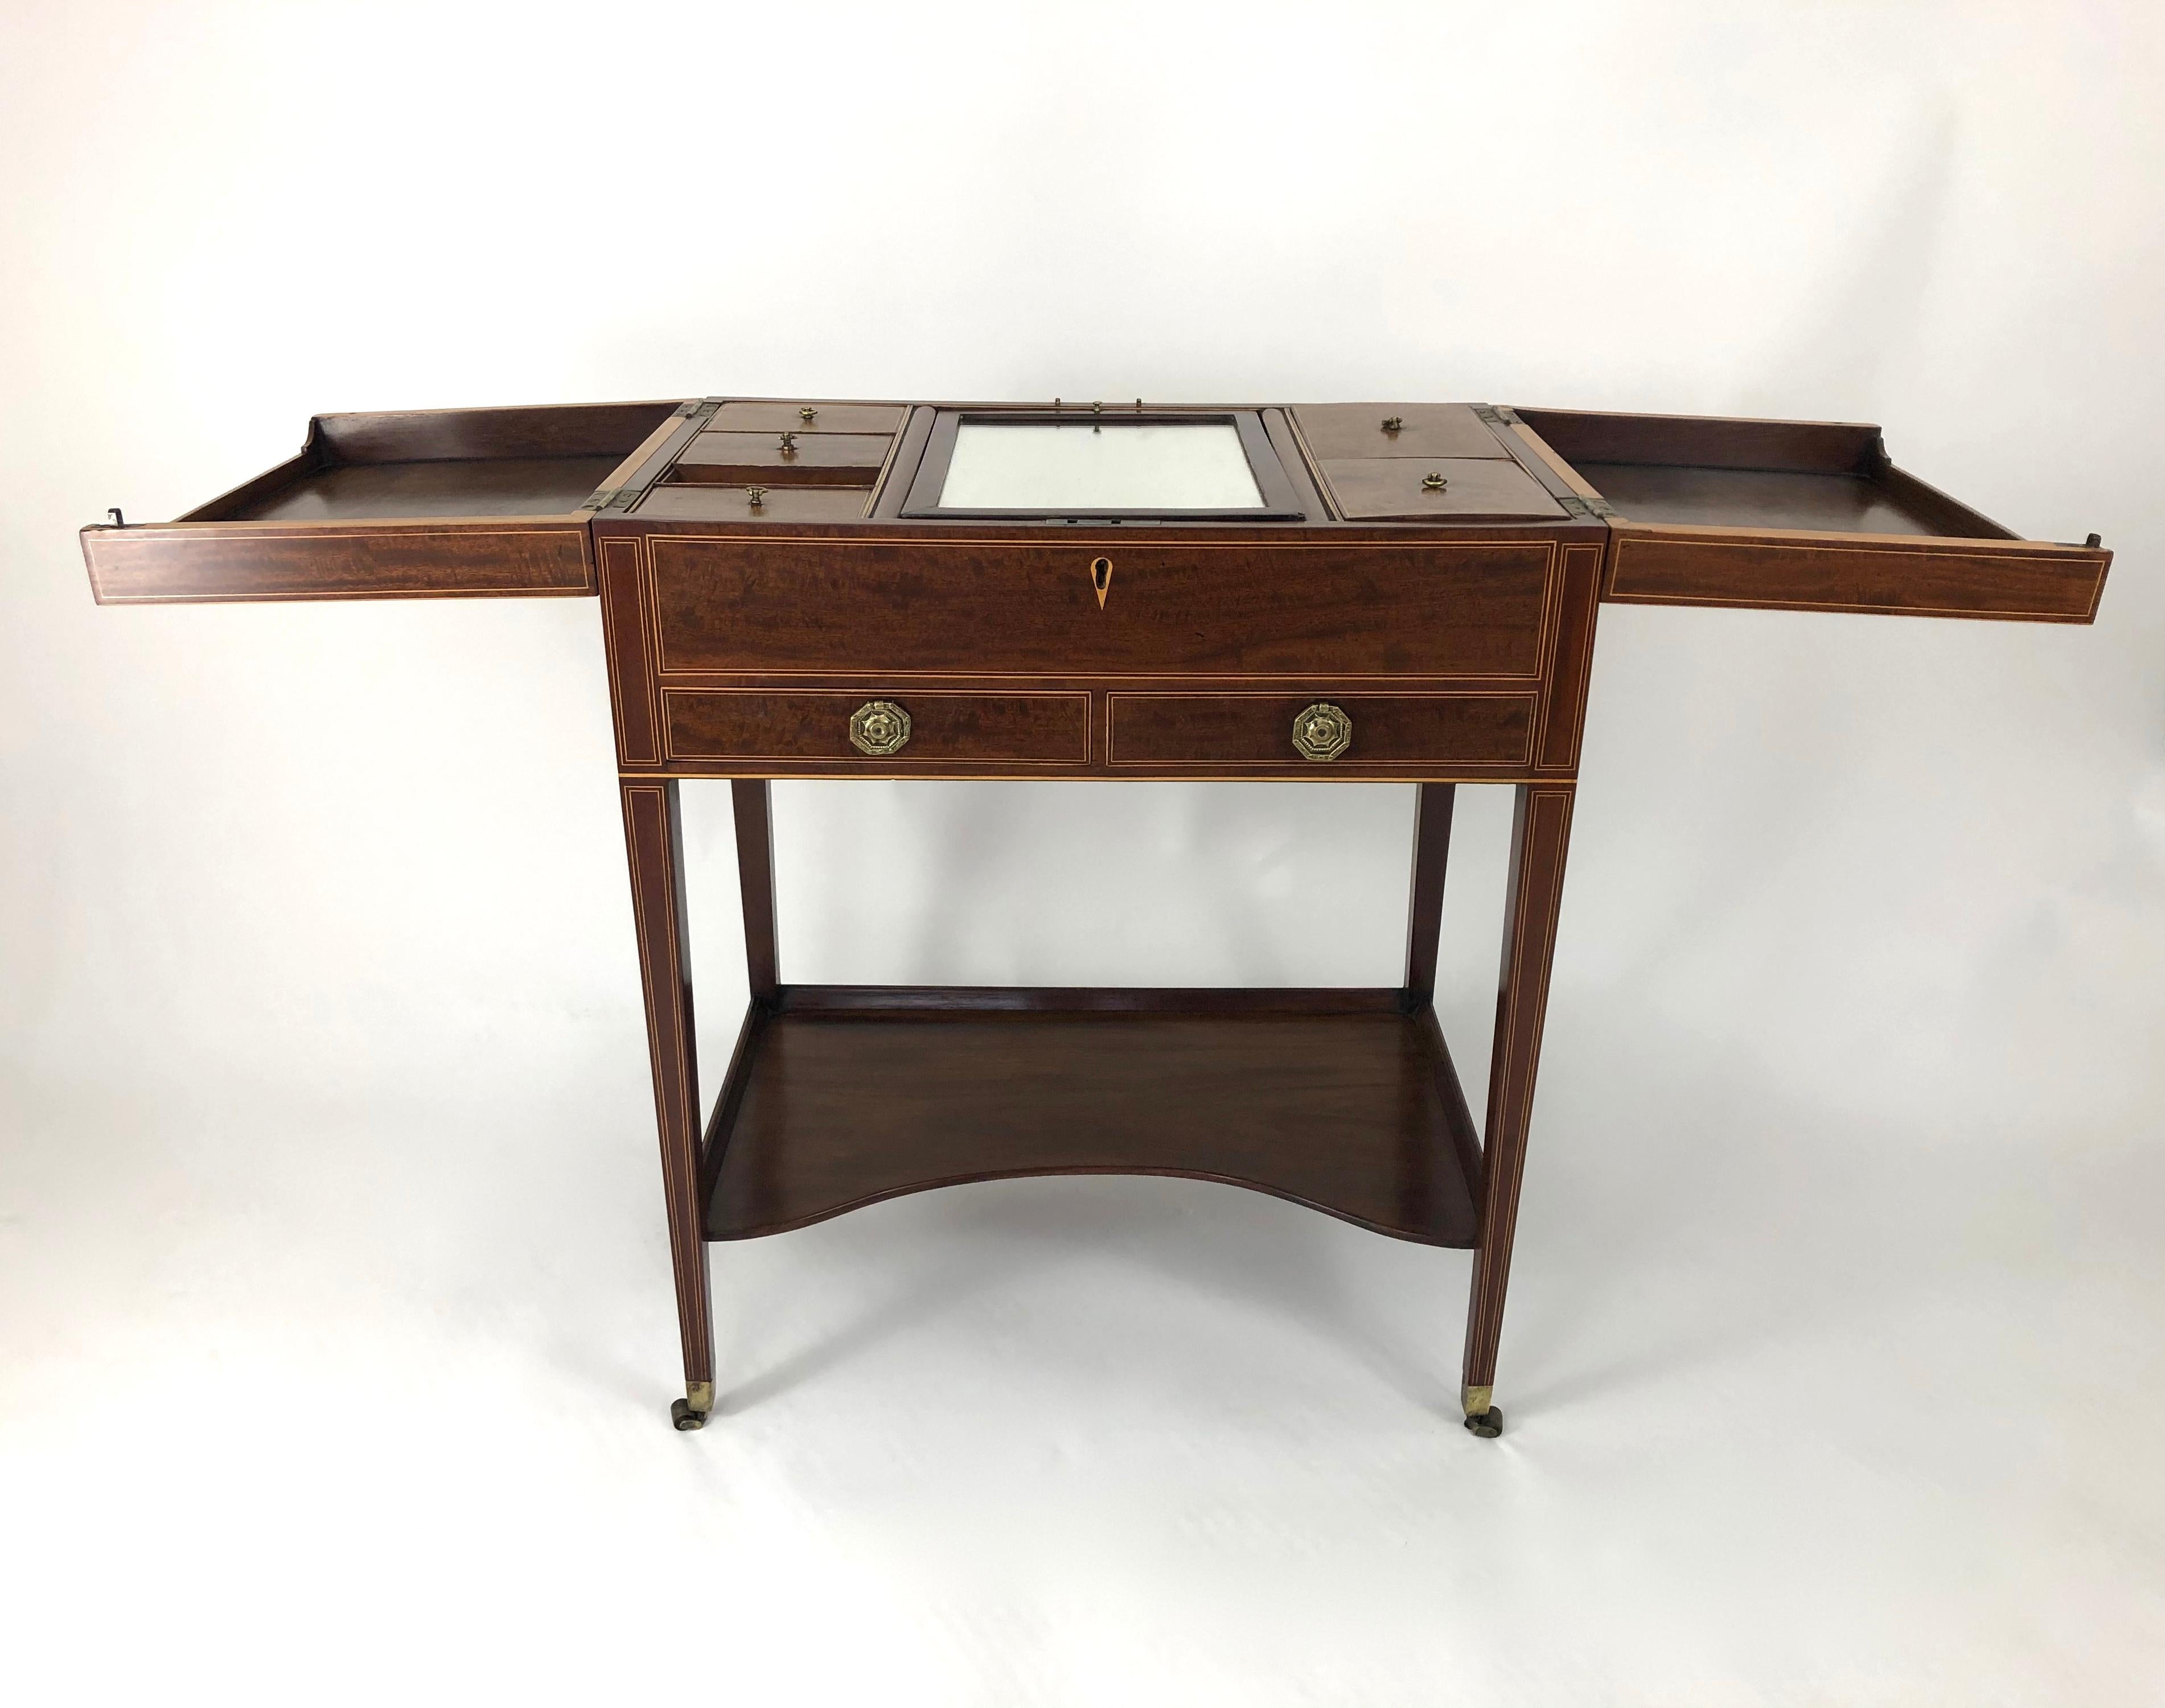 A fine quality antique English dressing table, circa 1800, often referred to as a Beau Brummell, in richly colored and figured inlaid mahogany. The top opens up to reveal an adjustable folding mirror and storage space flanked by covered compartments